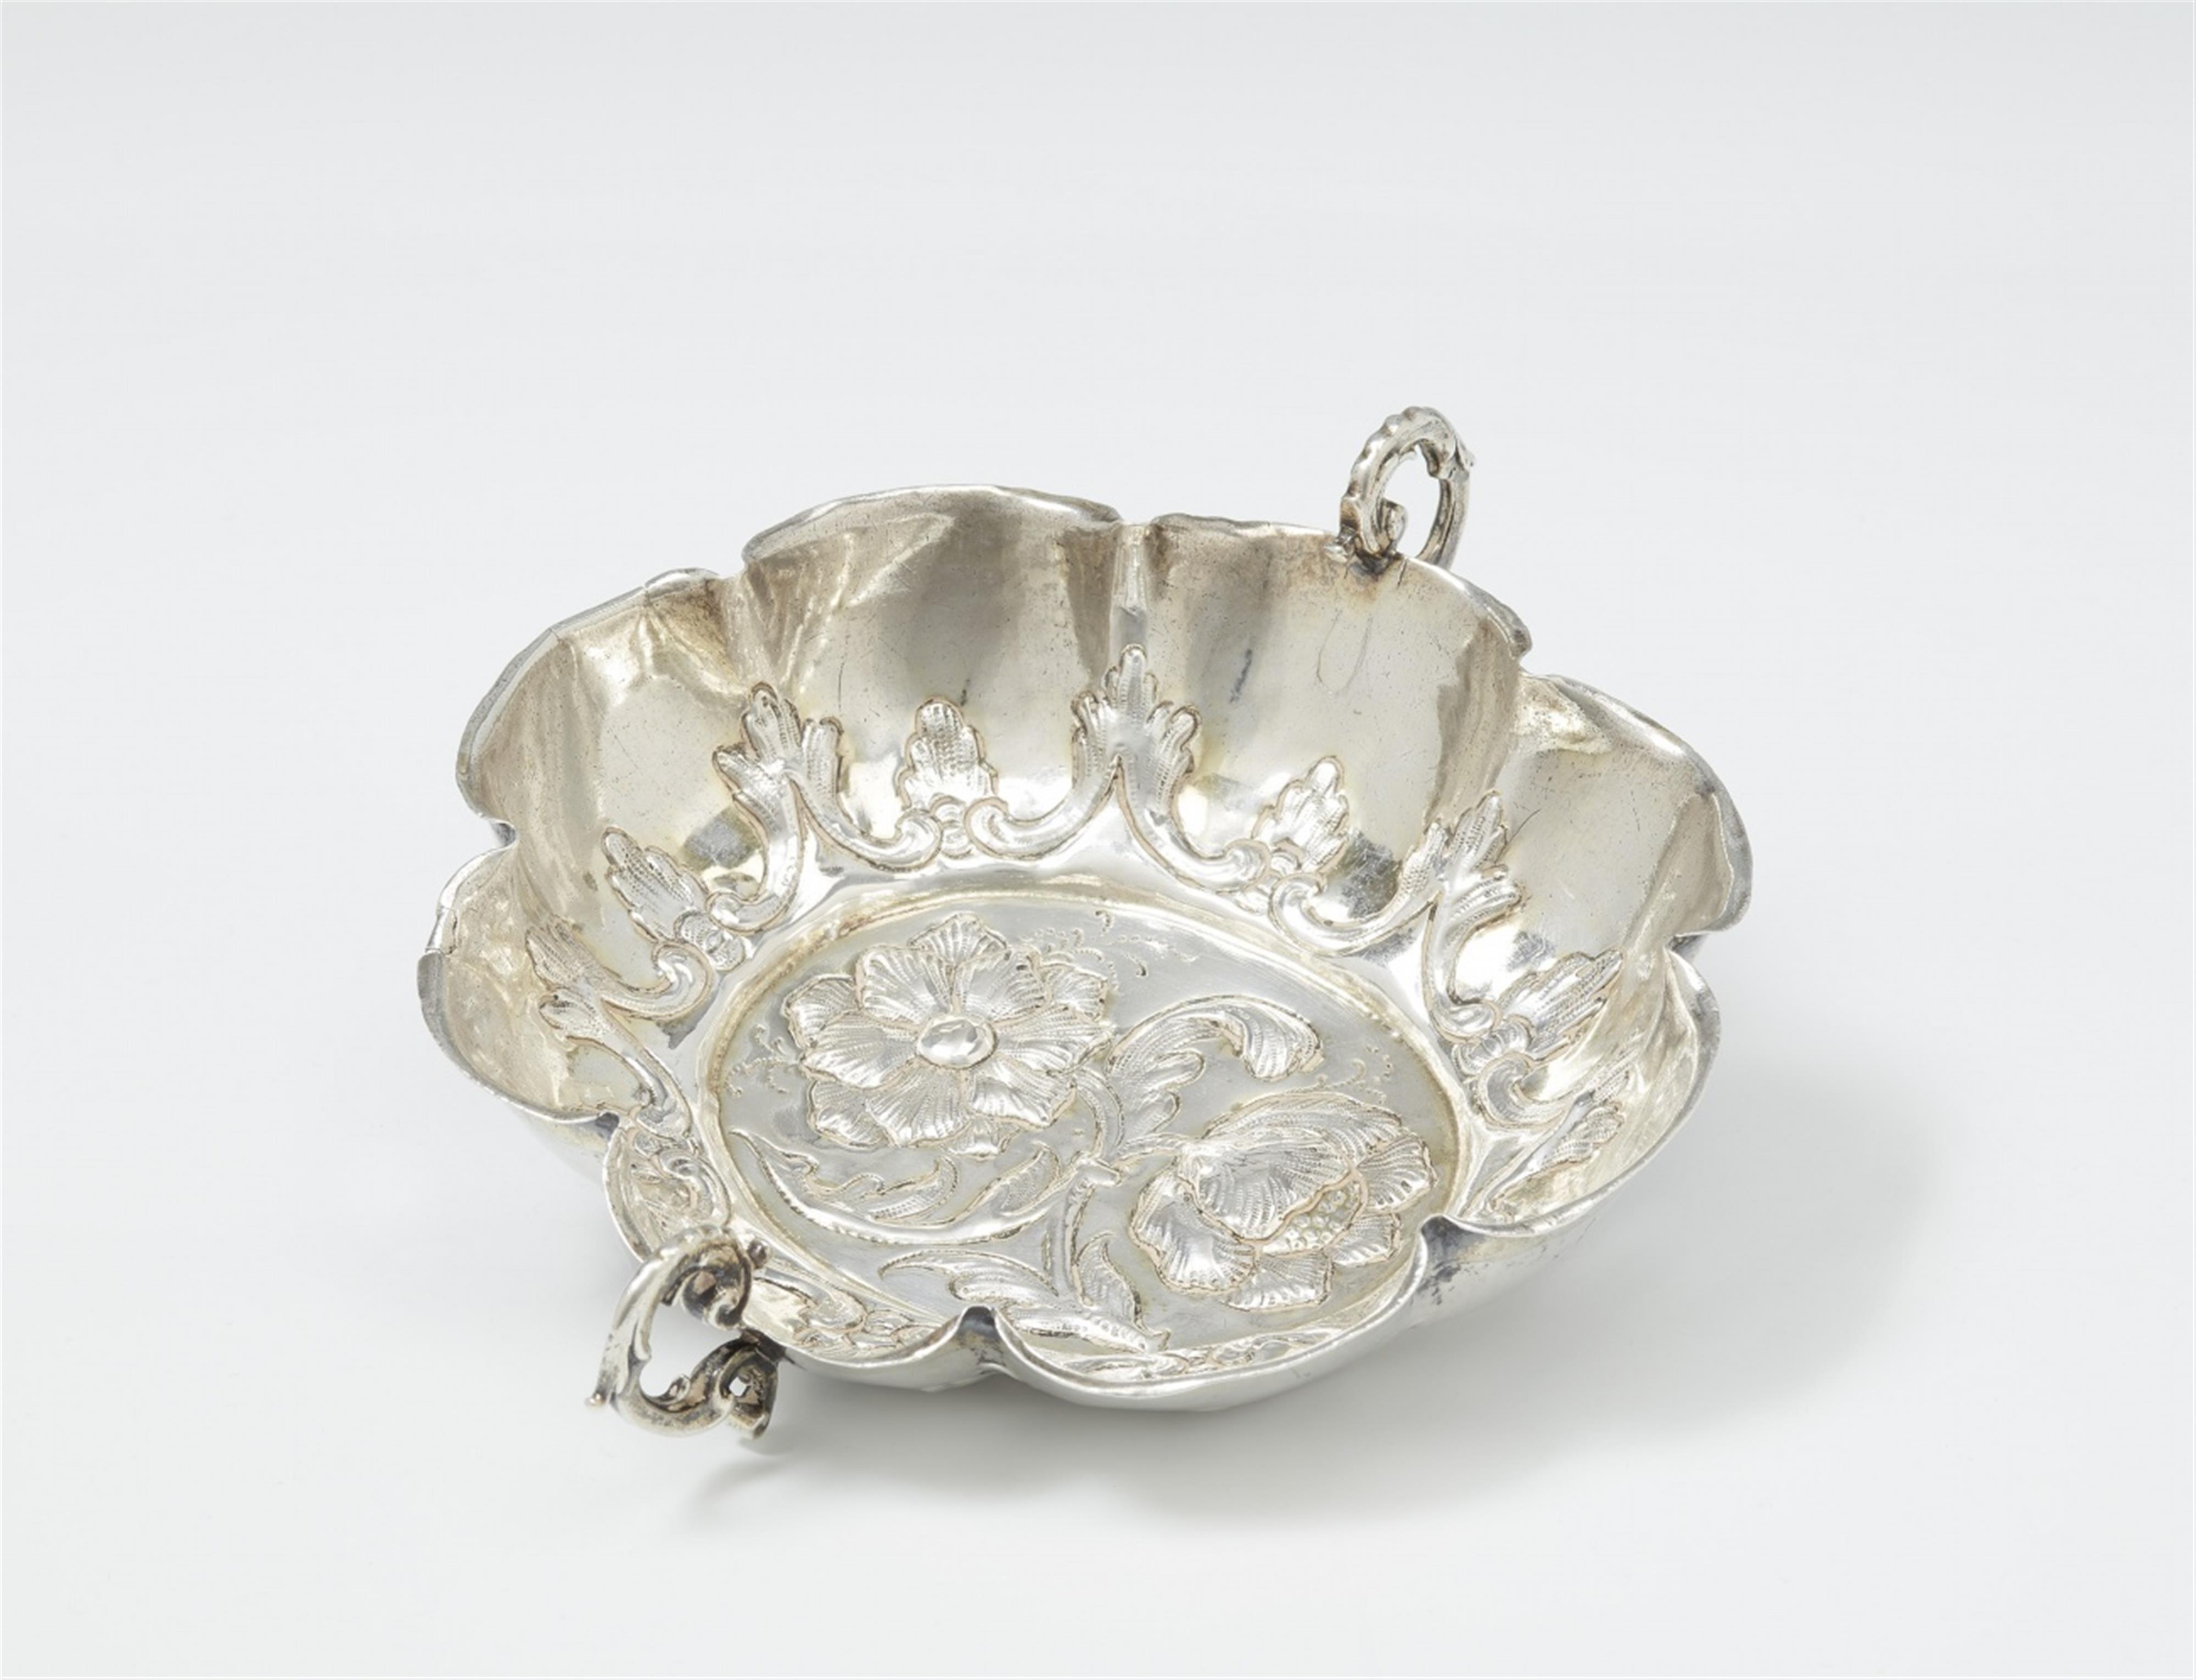 An Augsburg partially gilt silver brandy dish. With a small, engraved monogram "I*C*". Marks of Hans III Petrus, 1661 - 65. - image-1